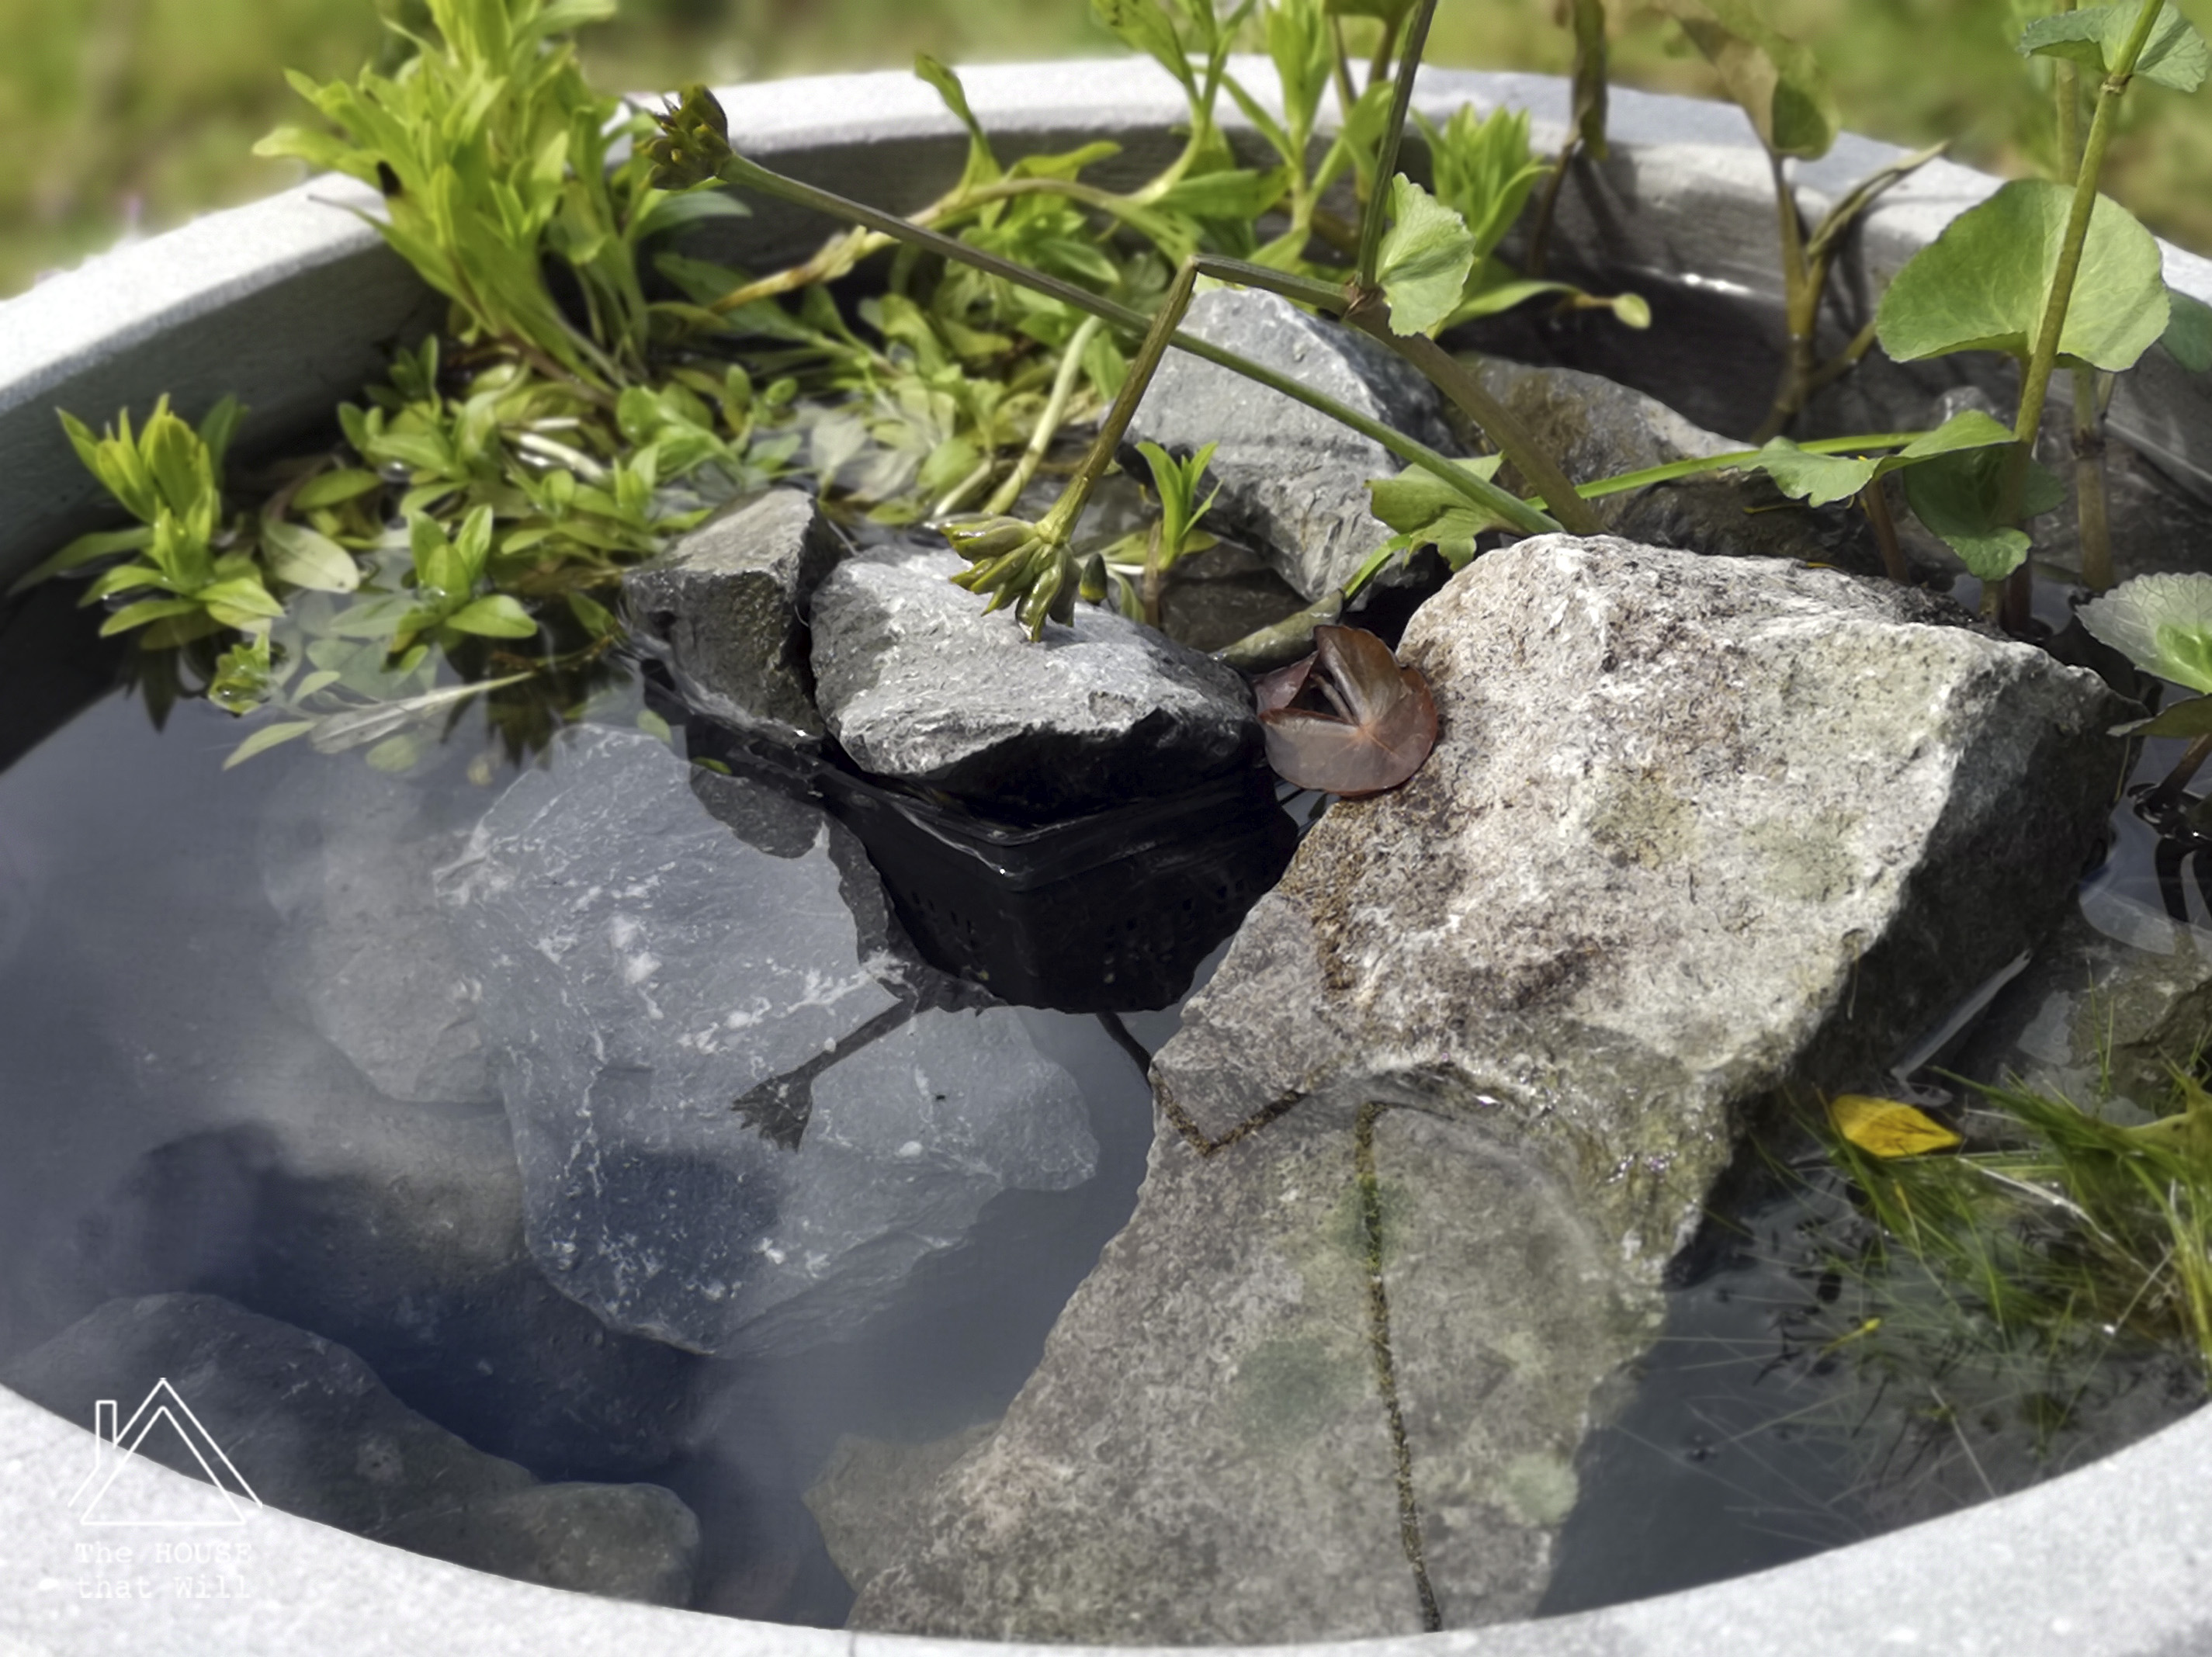 The House that Will | How to Creat a Mini Water Garden Wildlife Pond